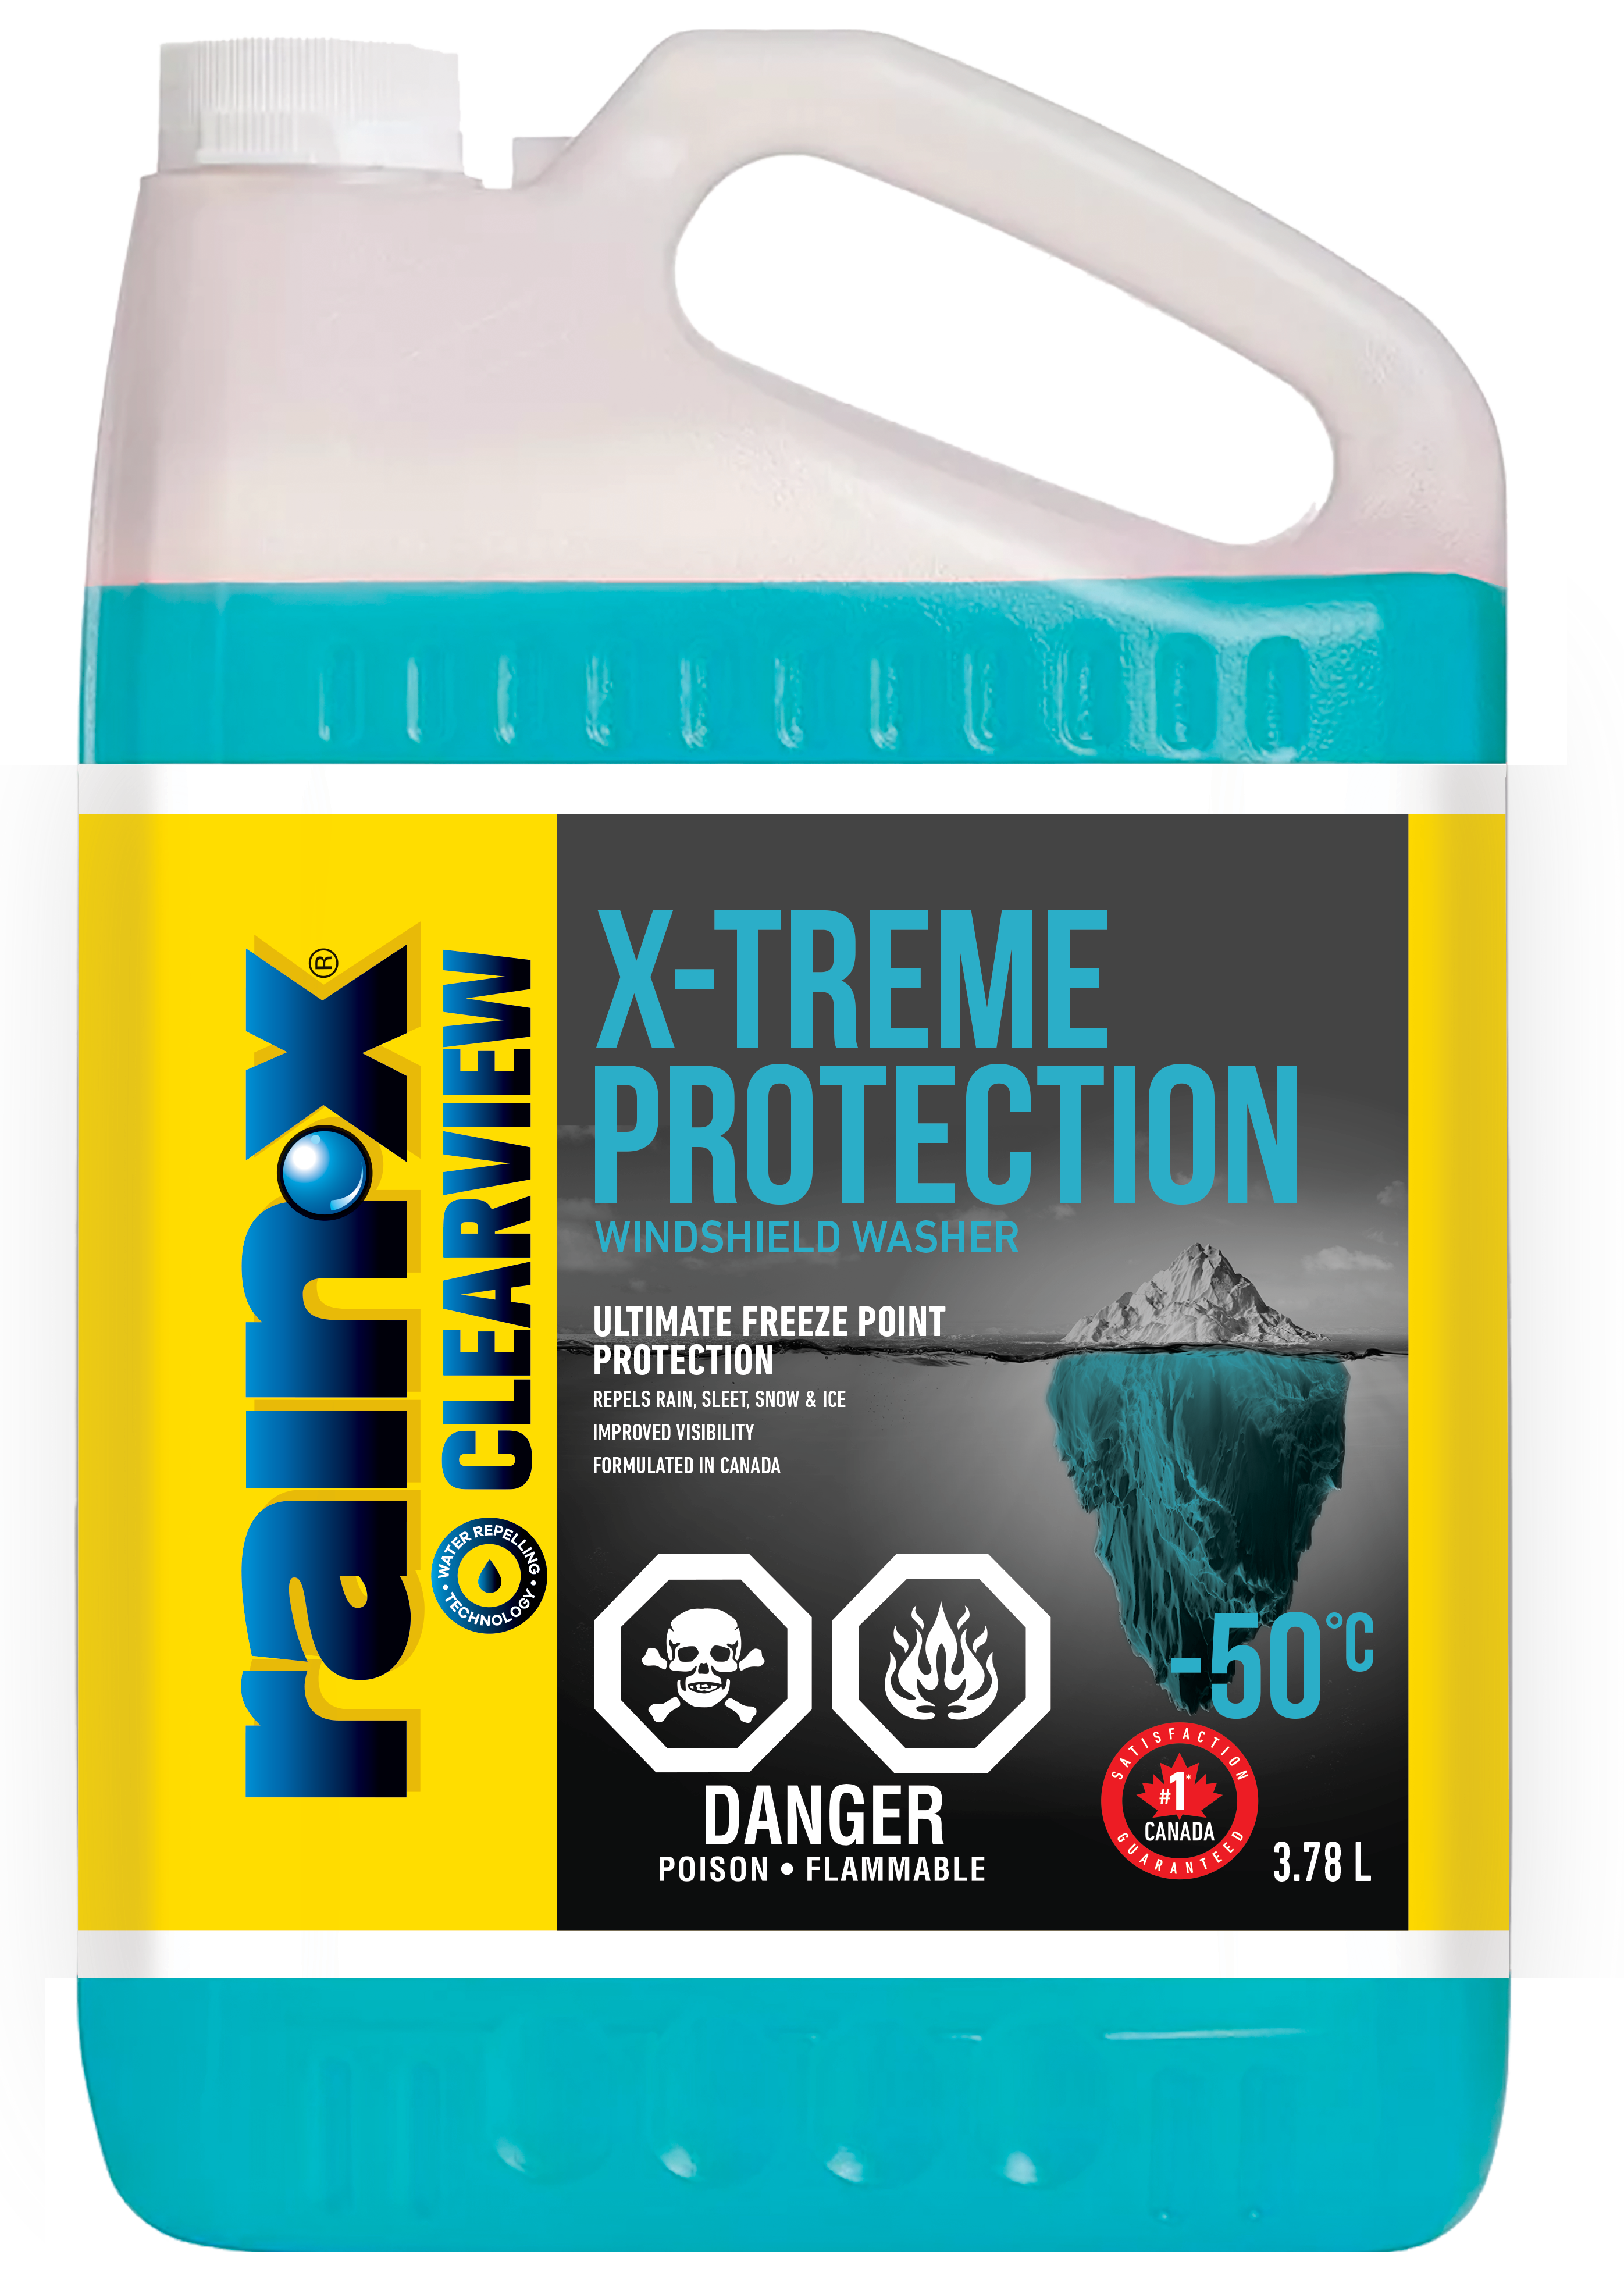 X-treme Protection by Rain-X for -50˚C